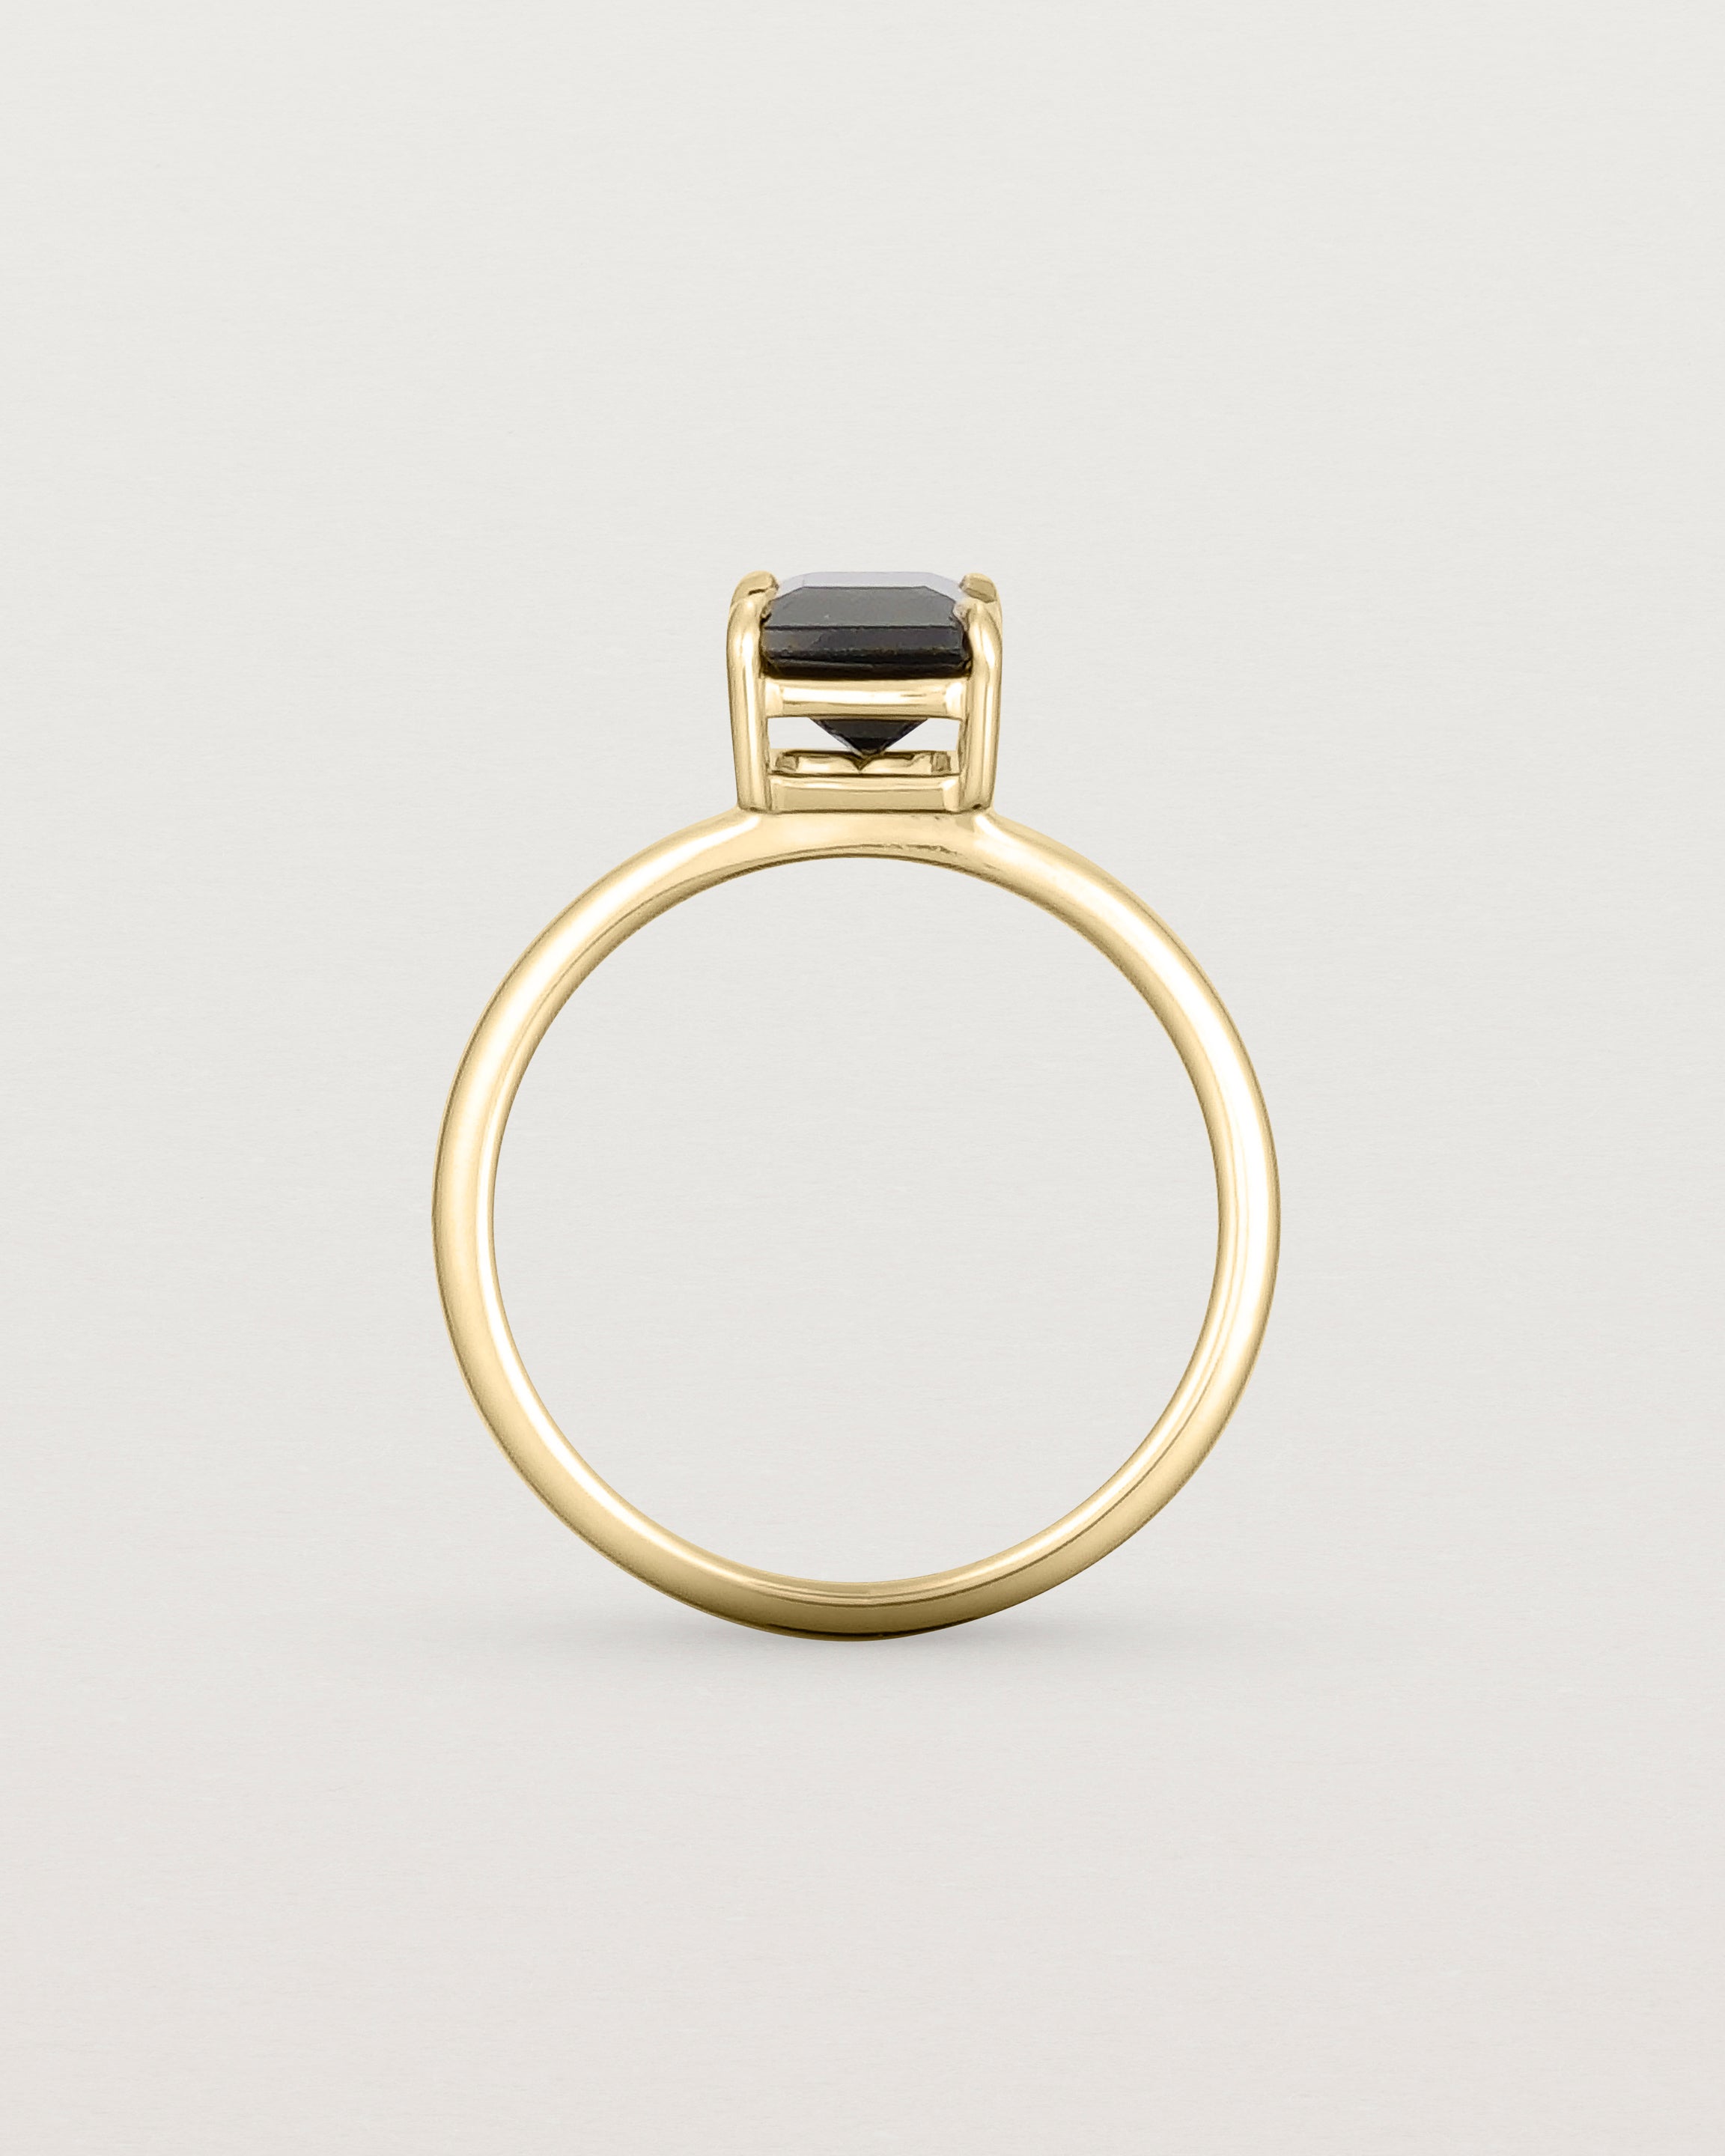 Standing view of the Una Emerald Solitaire | Black Spinel | Yellow Gold.